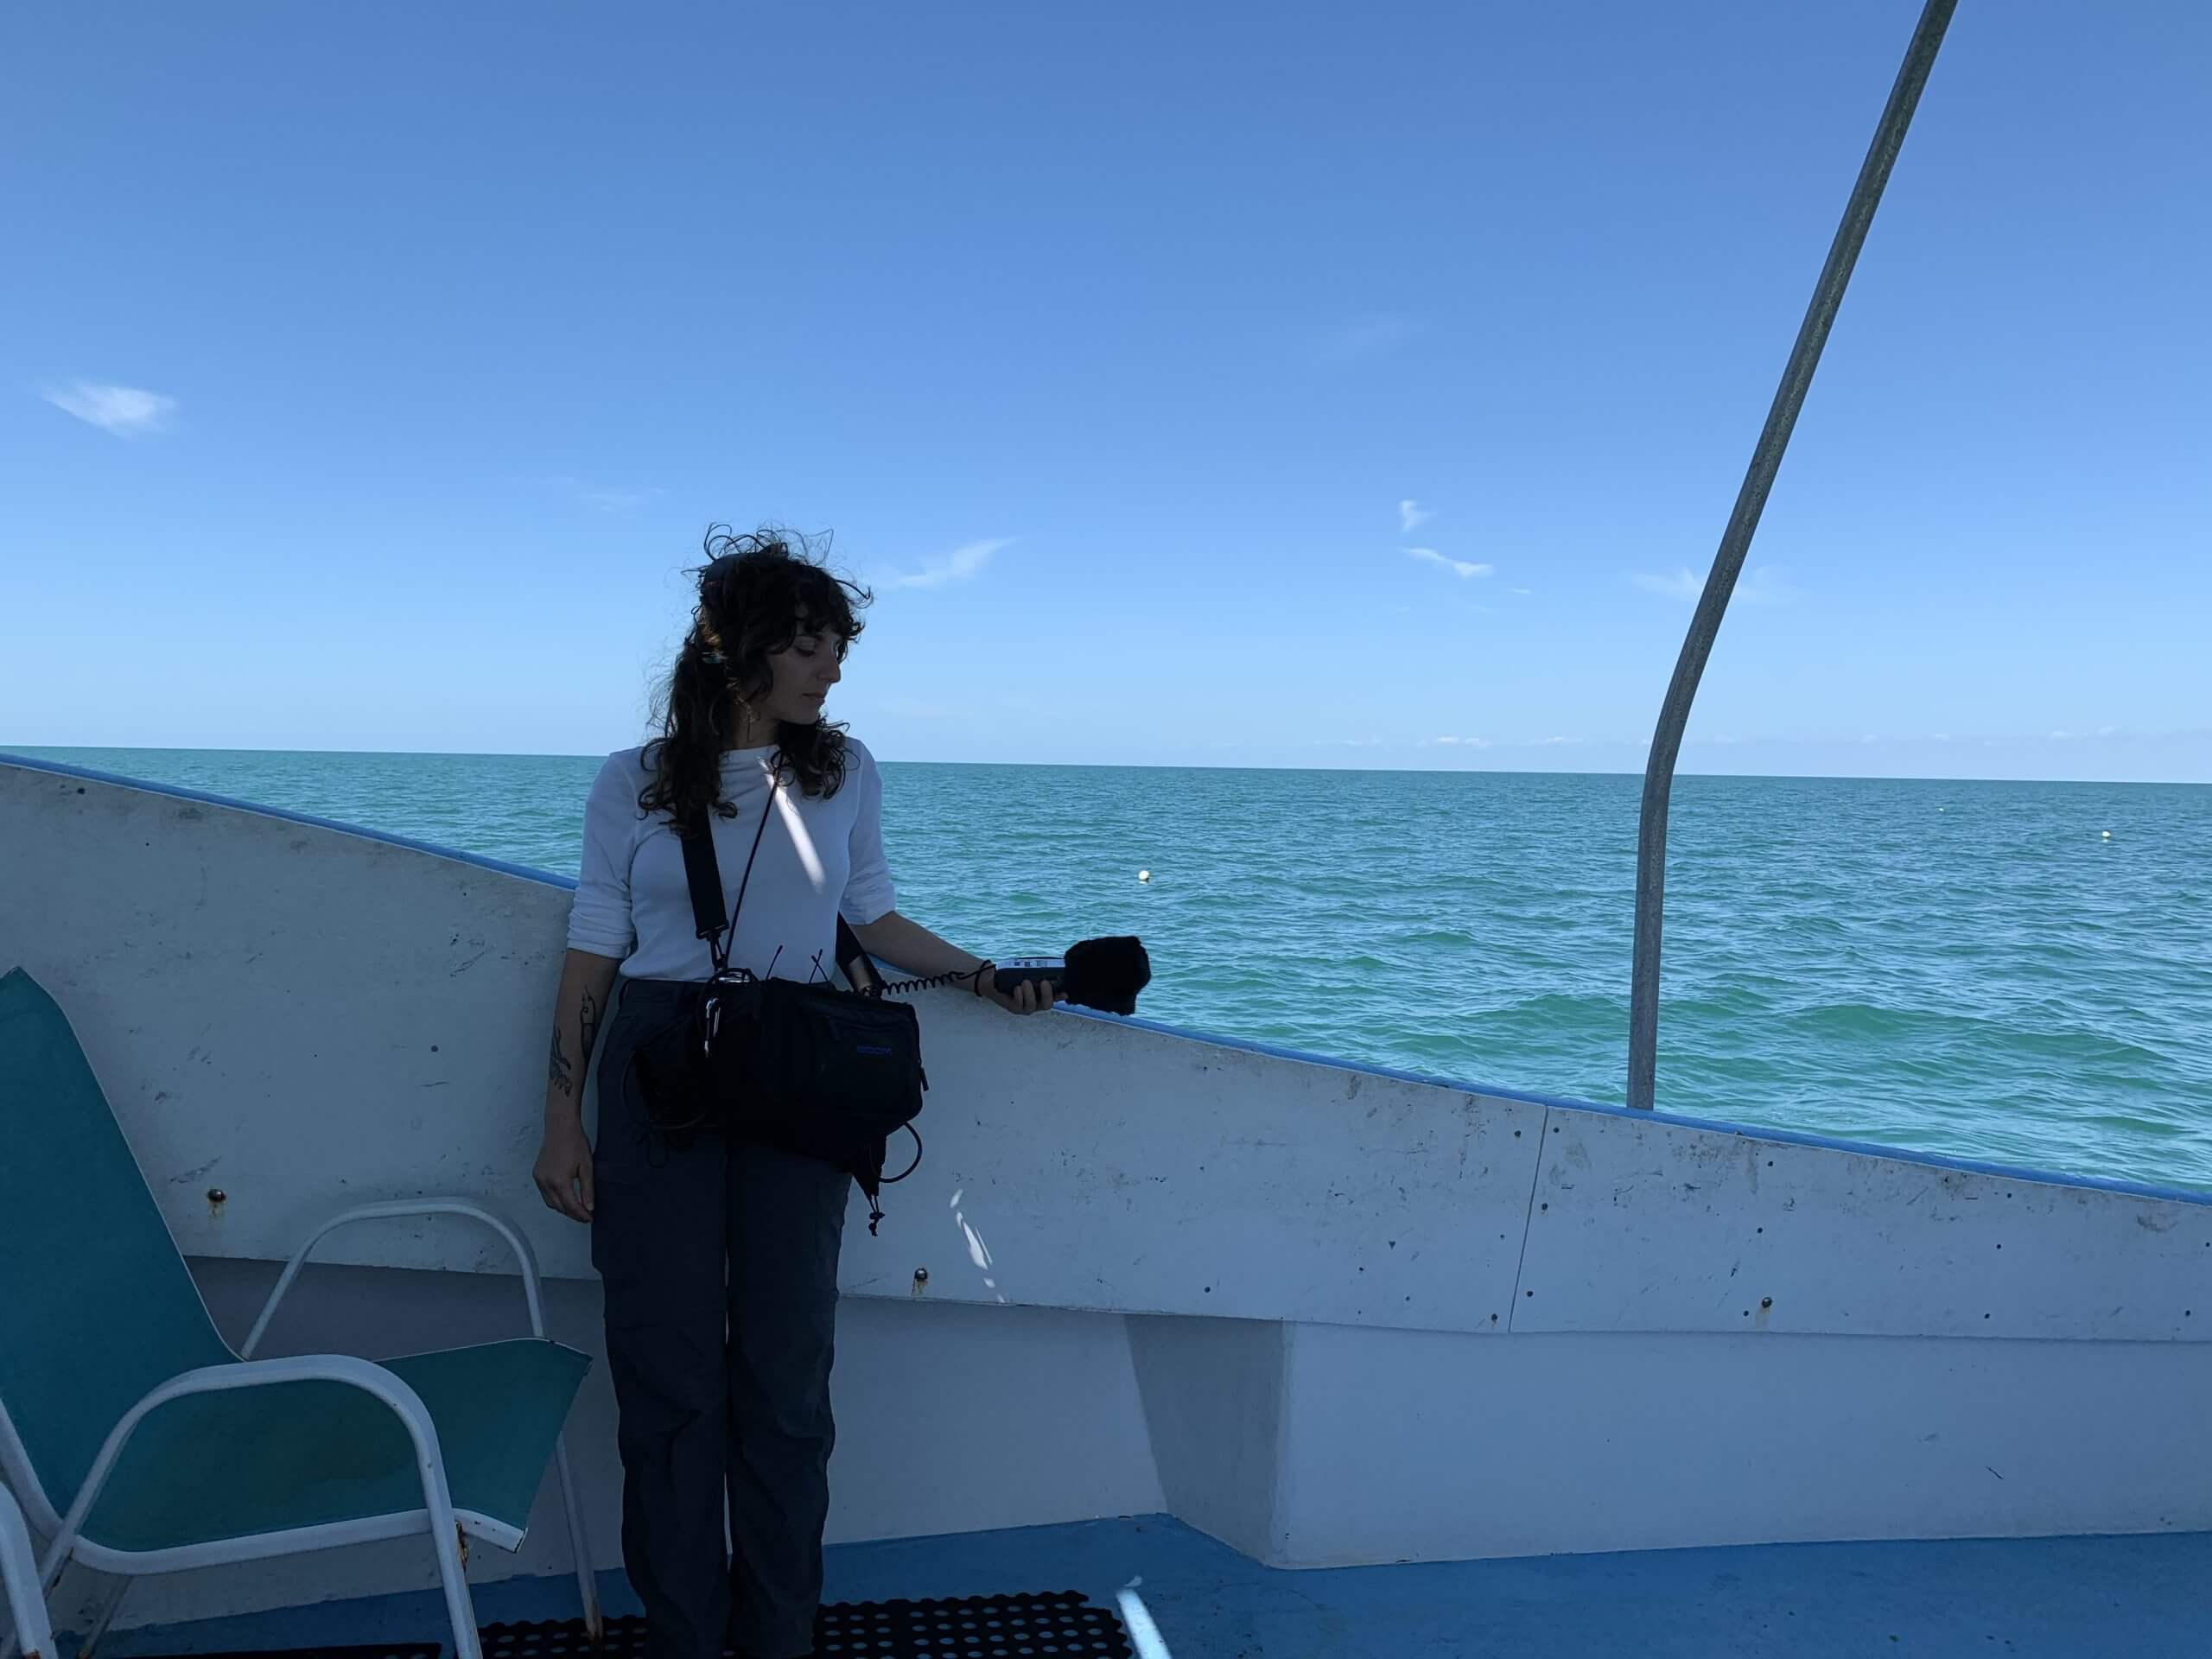 Sasha records sounds on a boat in the Gulf of Mexico